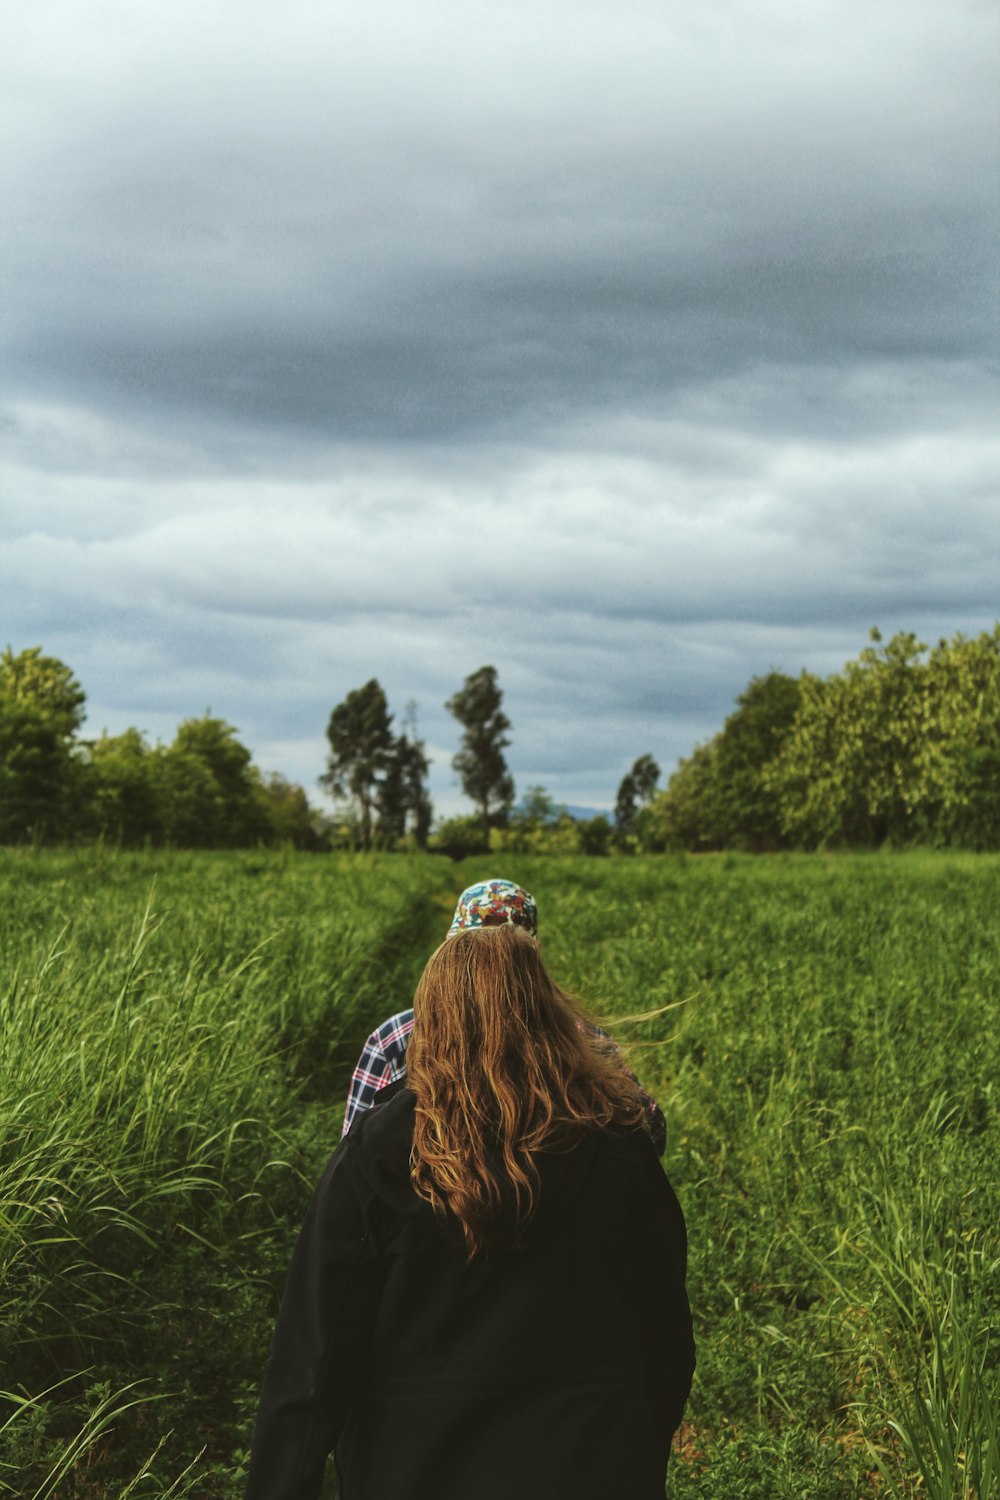 woman in black jacket sitting on green grass field under gray cloudy sky during daytime